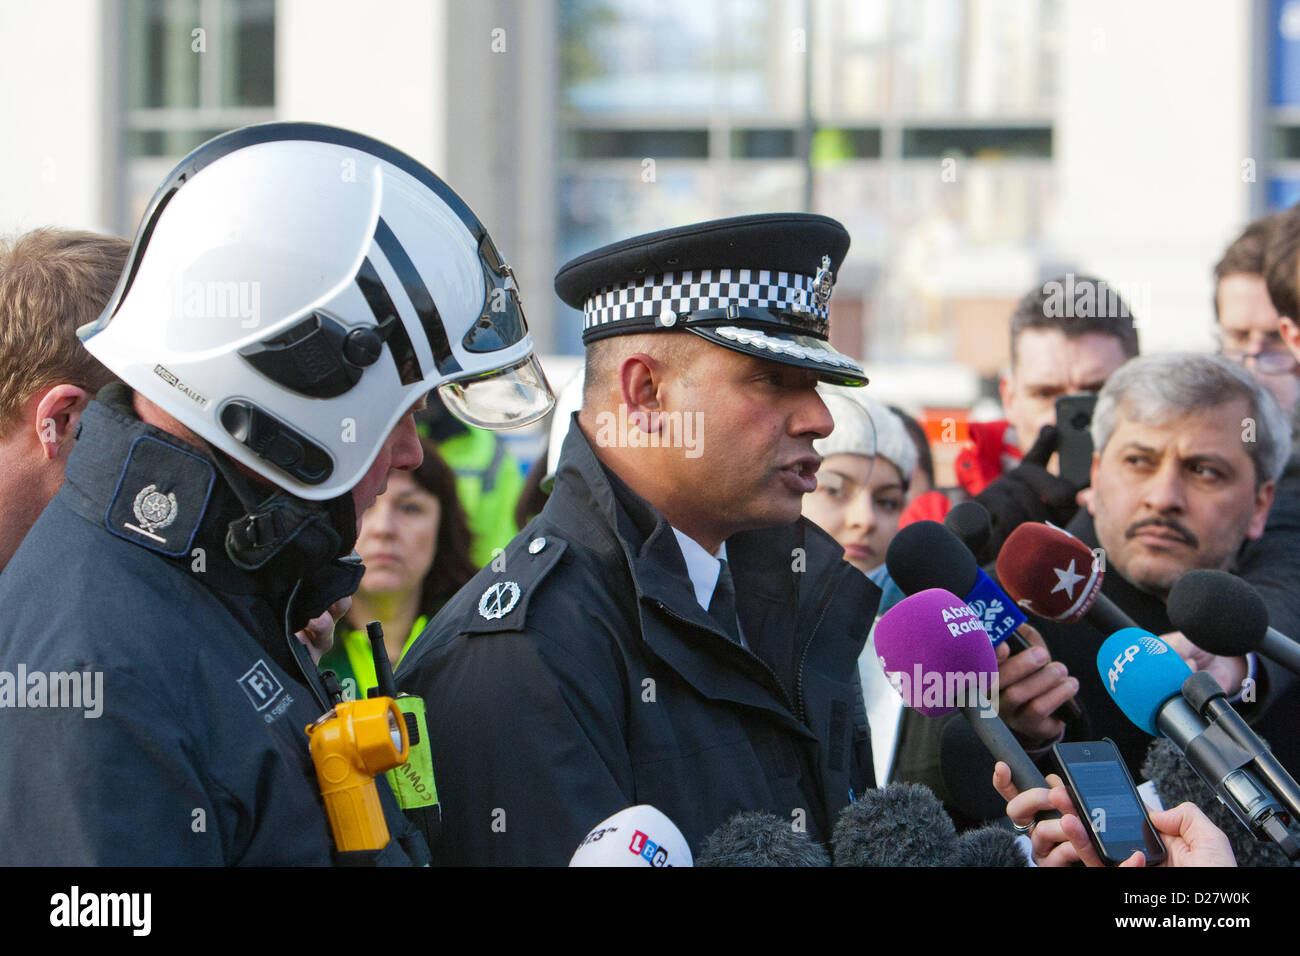 London, UK. 16th January 2013. Metropolitan Police Commander Neil Basu informs the press the helicopter was a commercial flight which had taken off from Redhill on Wednesday morning for Elstree in Hertfordshire. He confirms there were two fatalities and nine wounded. One of the fatalities was the pilot, the other was in the proximity of where the aircraft came down. Vauxhall, London, UK 16th January 2012. Credit:  martyn wheatley / Alamy Live News Stock Photo